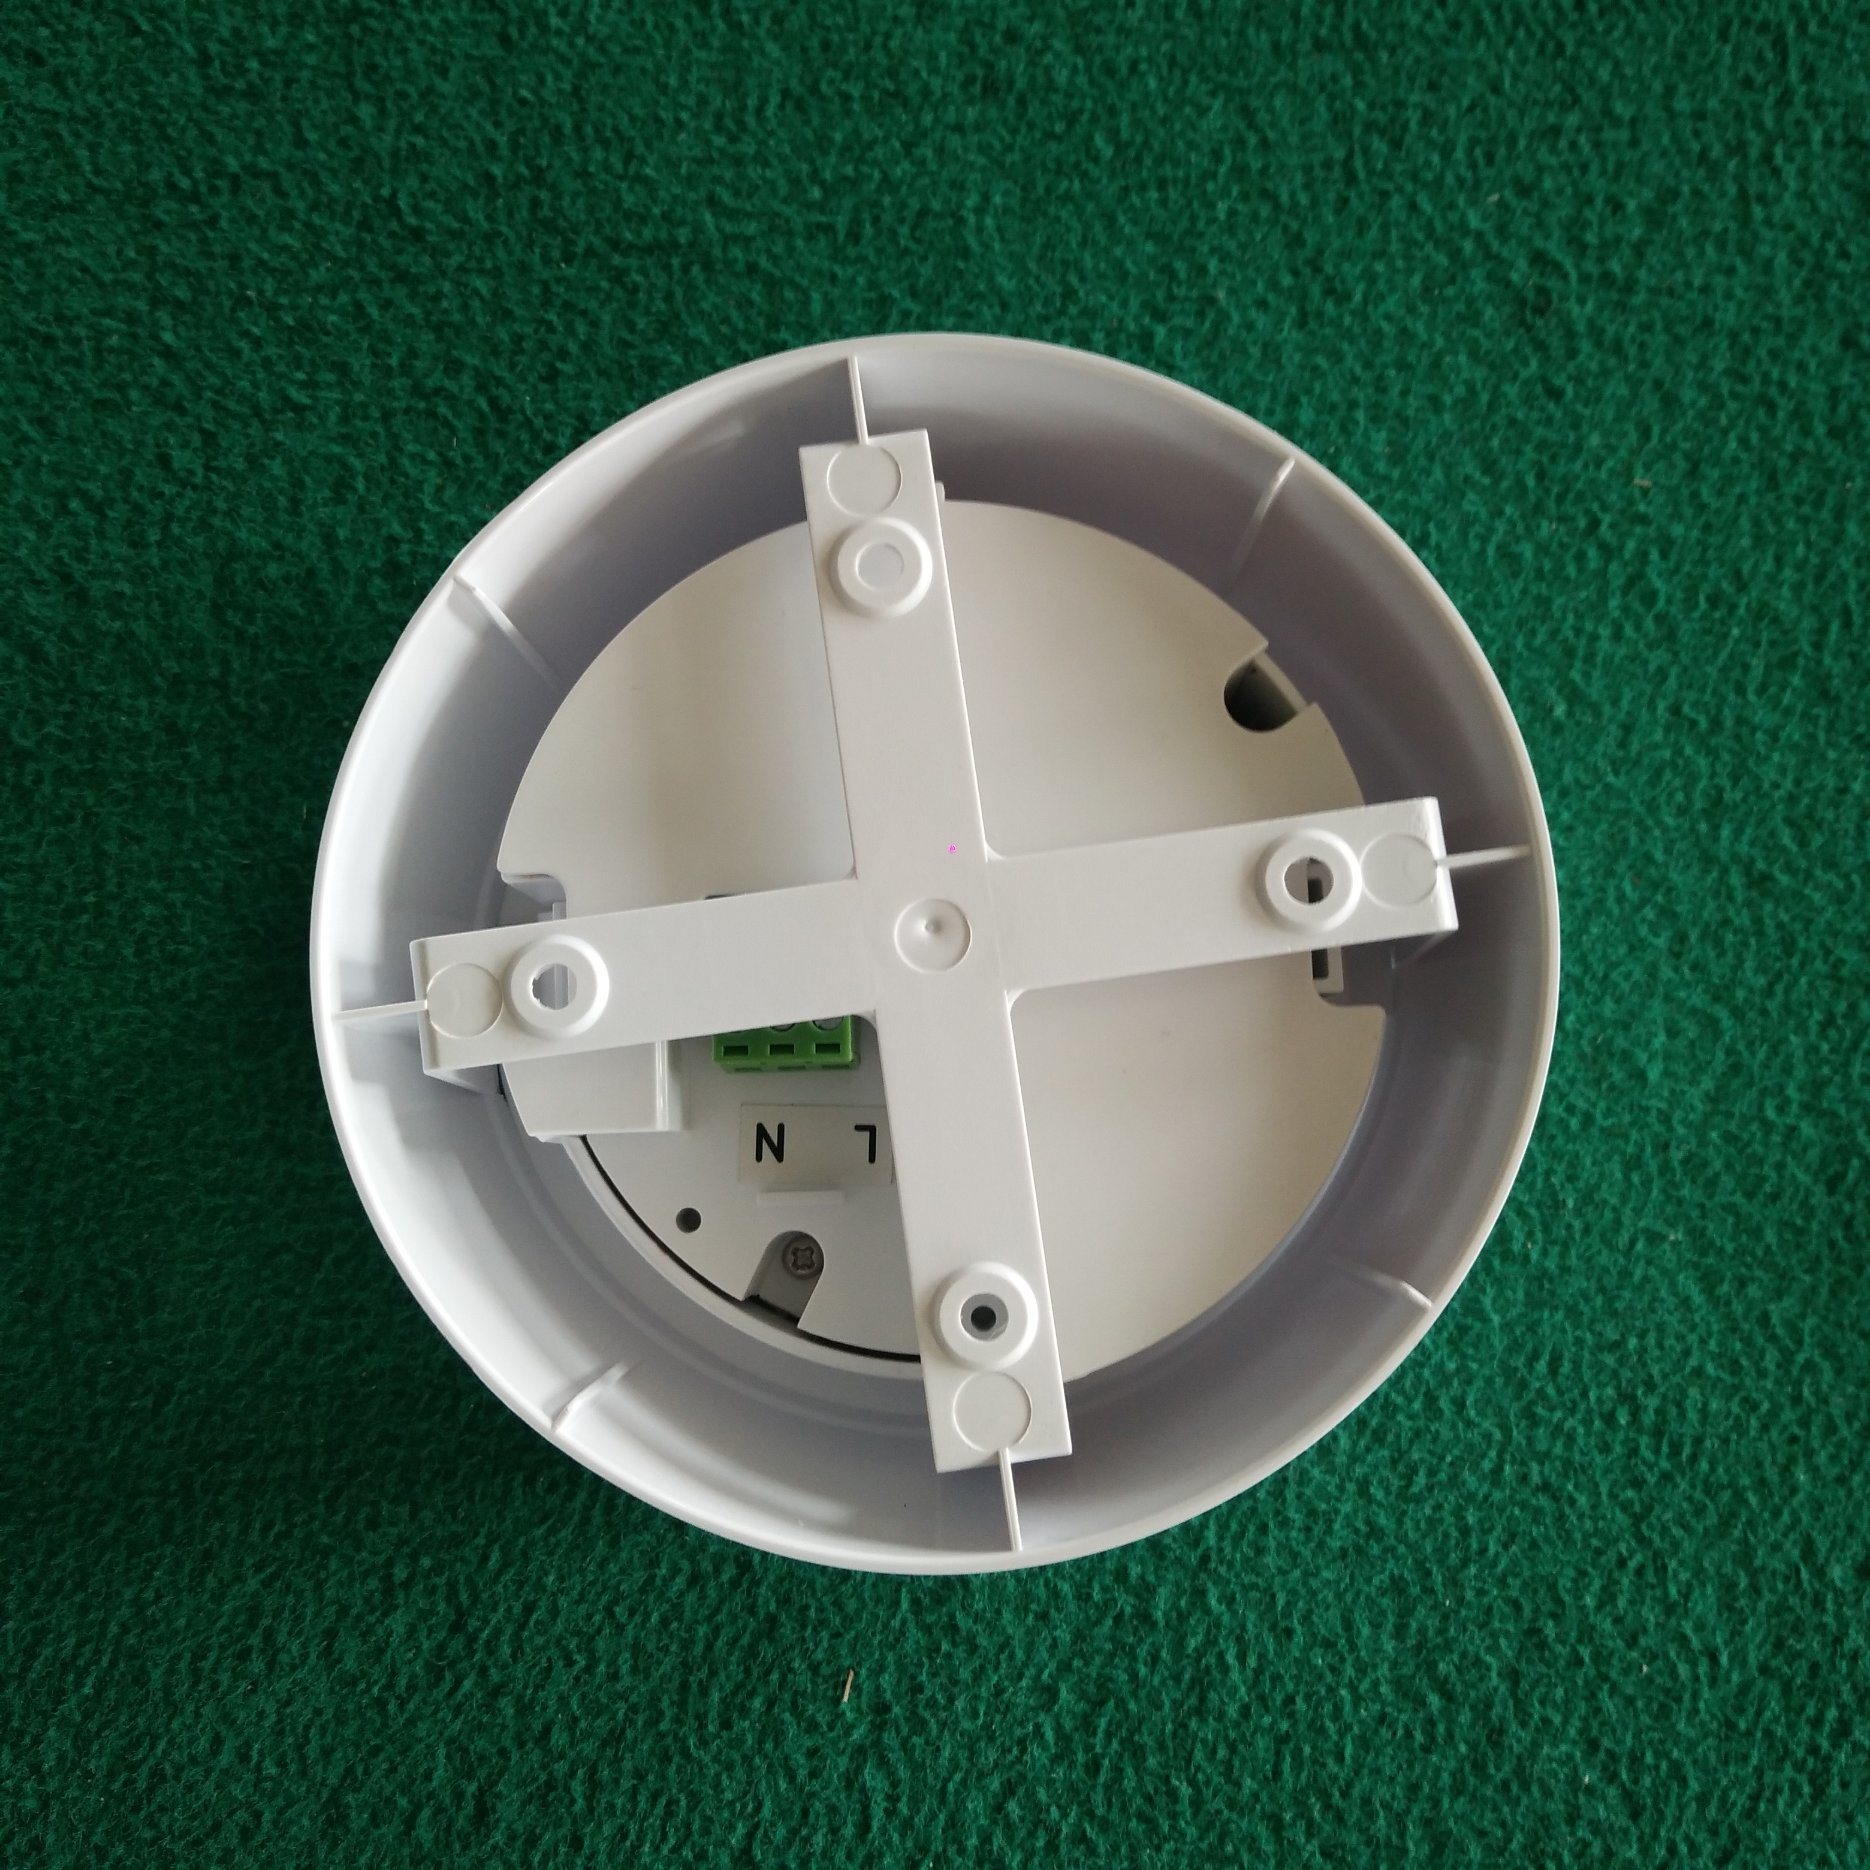 LED Emergency Downlight with Rechargeable Battery